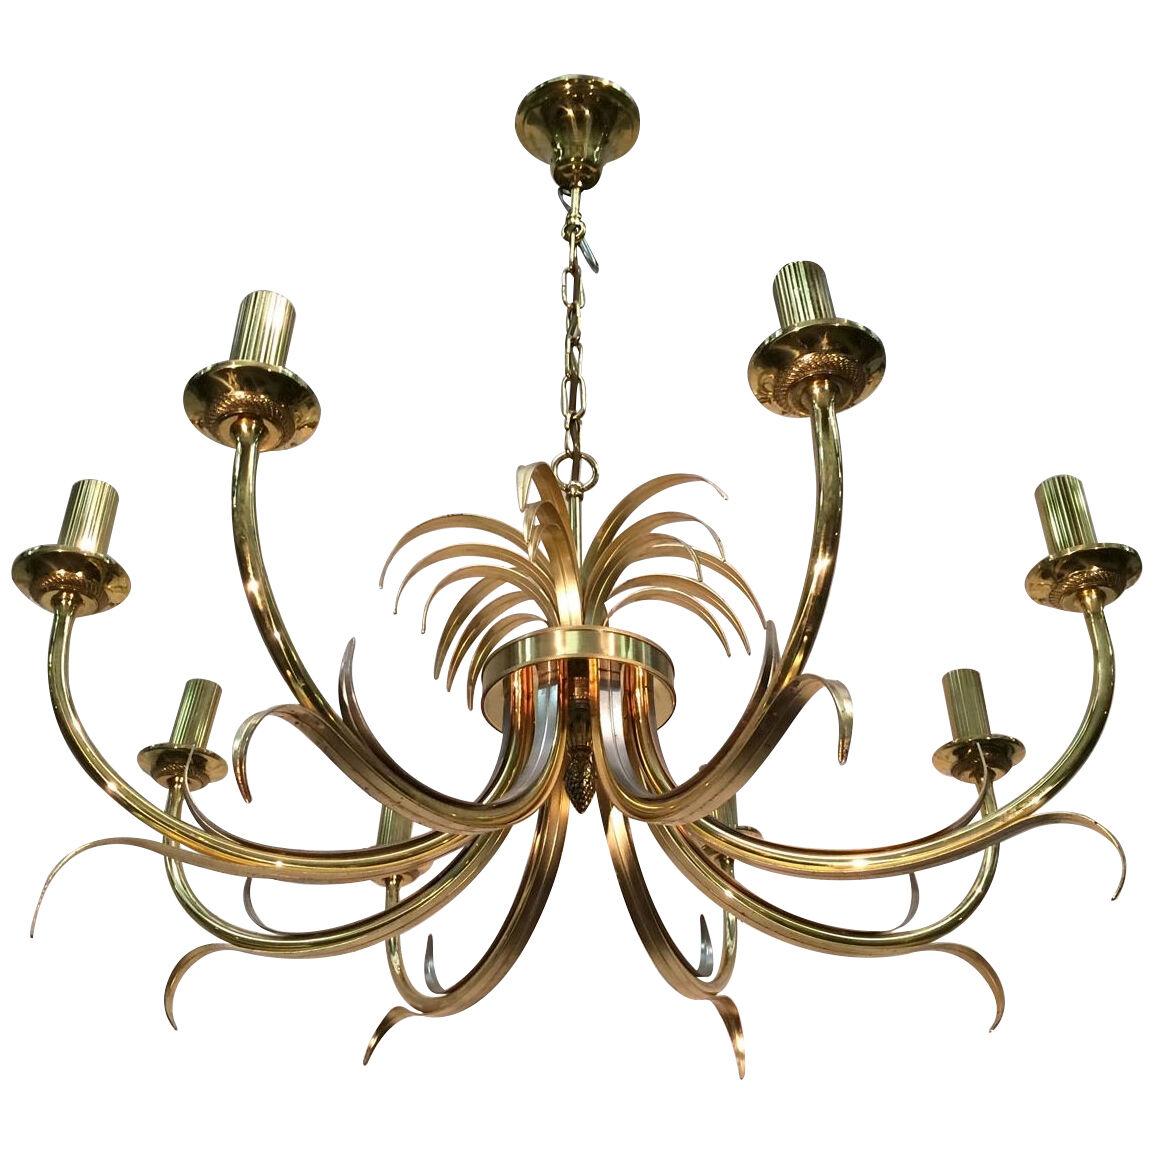 Brushed Metal and Gilt Metal Pineapple Chandelier in the Style of Maison Baguès